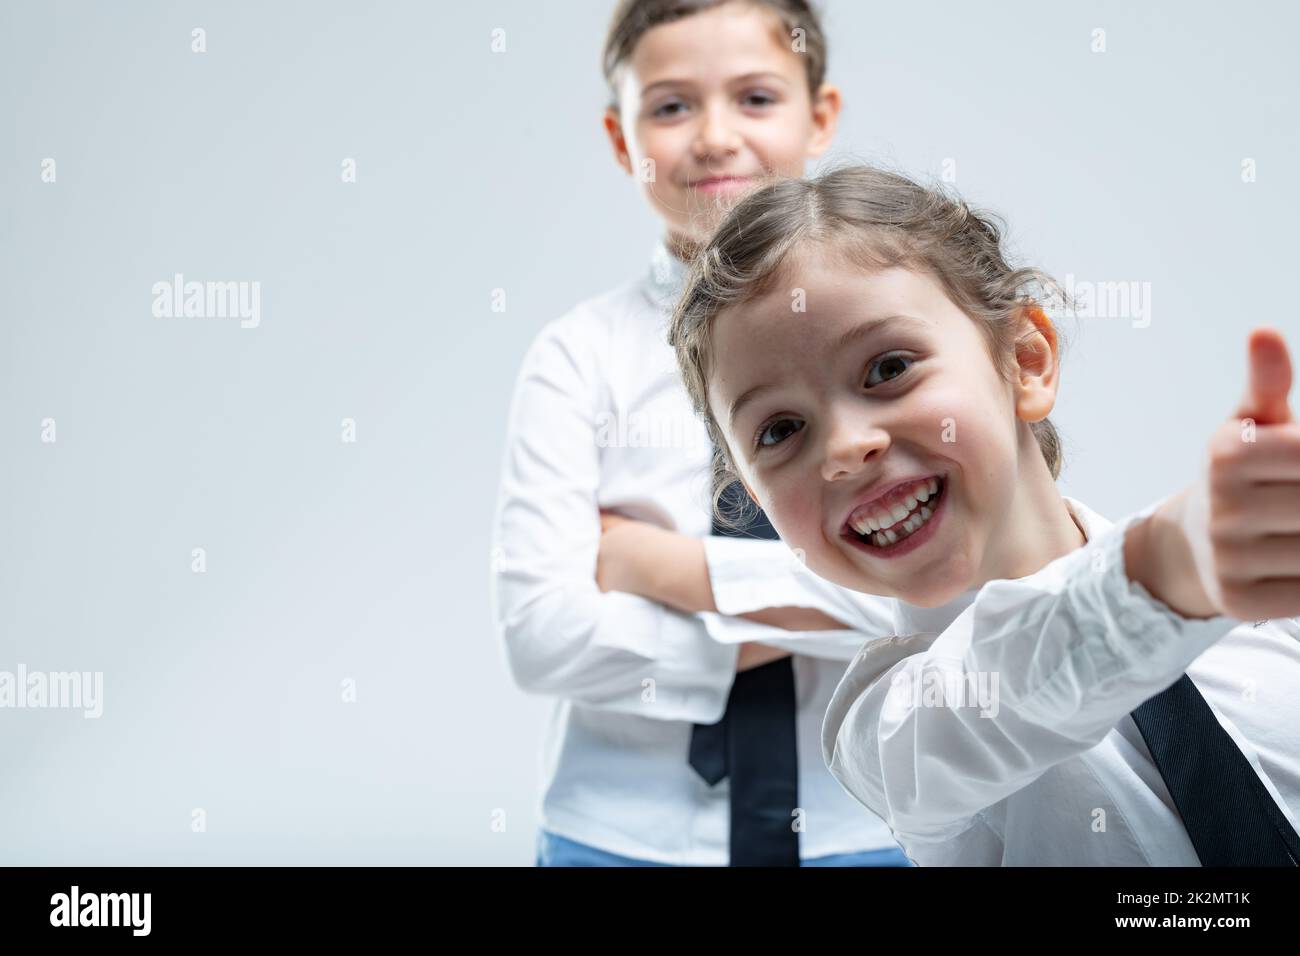 Cheeky enthusiastic little girl giving a thumbs up Stock Photo